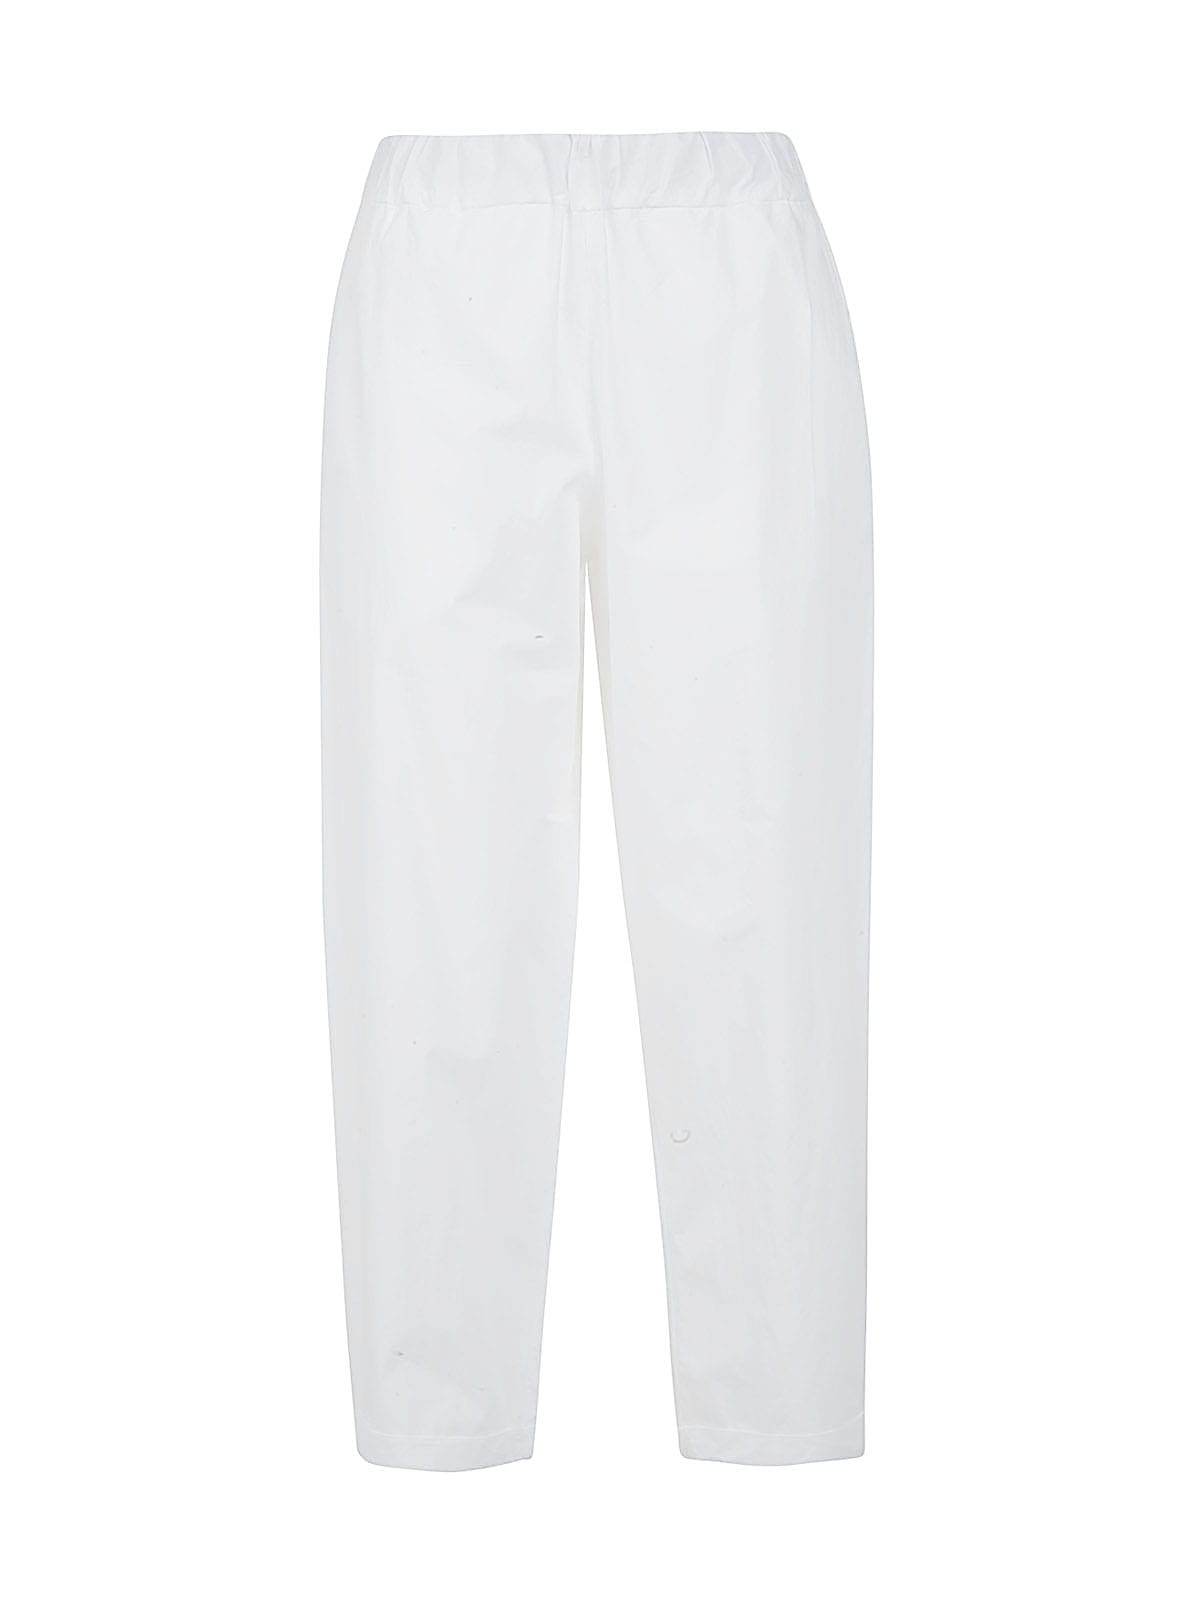 Labo.Art Elastic Waist Trousers With Pockets